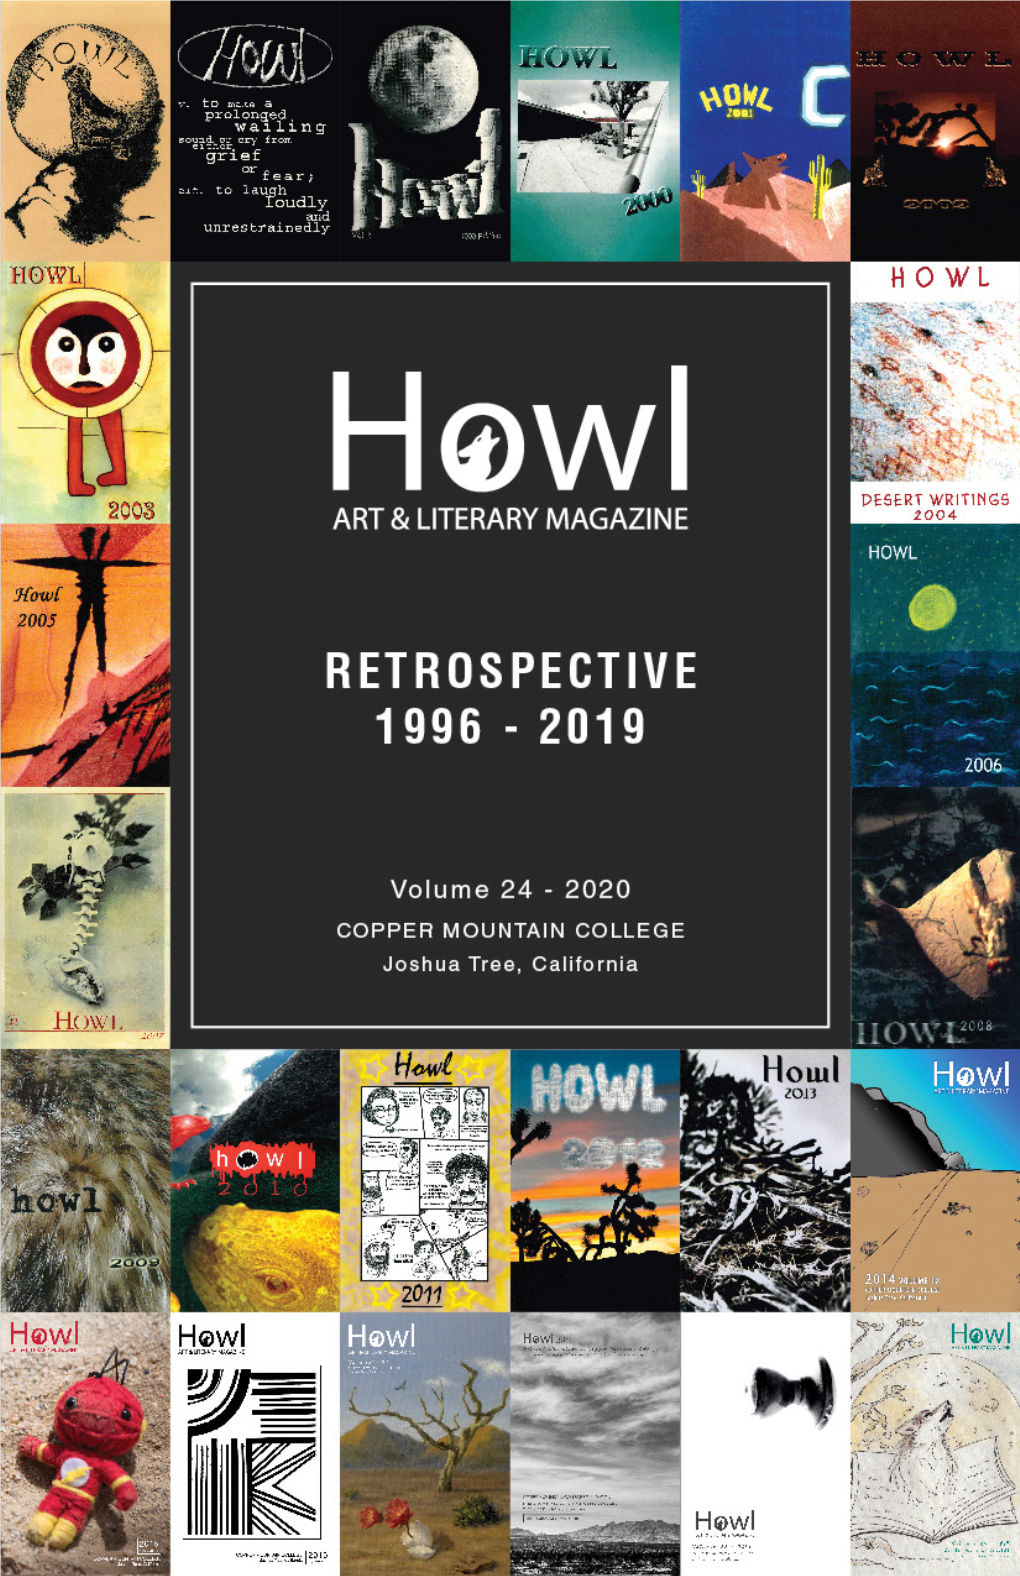 HOWL 2020 Is an “Editor’S Choice/Best-Of” Issue for a Couple a Line Item in Their Budget to Cover Production and Publishing Expenses on of Different Reasons